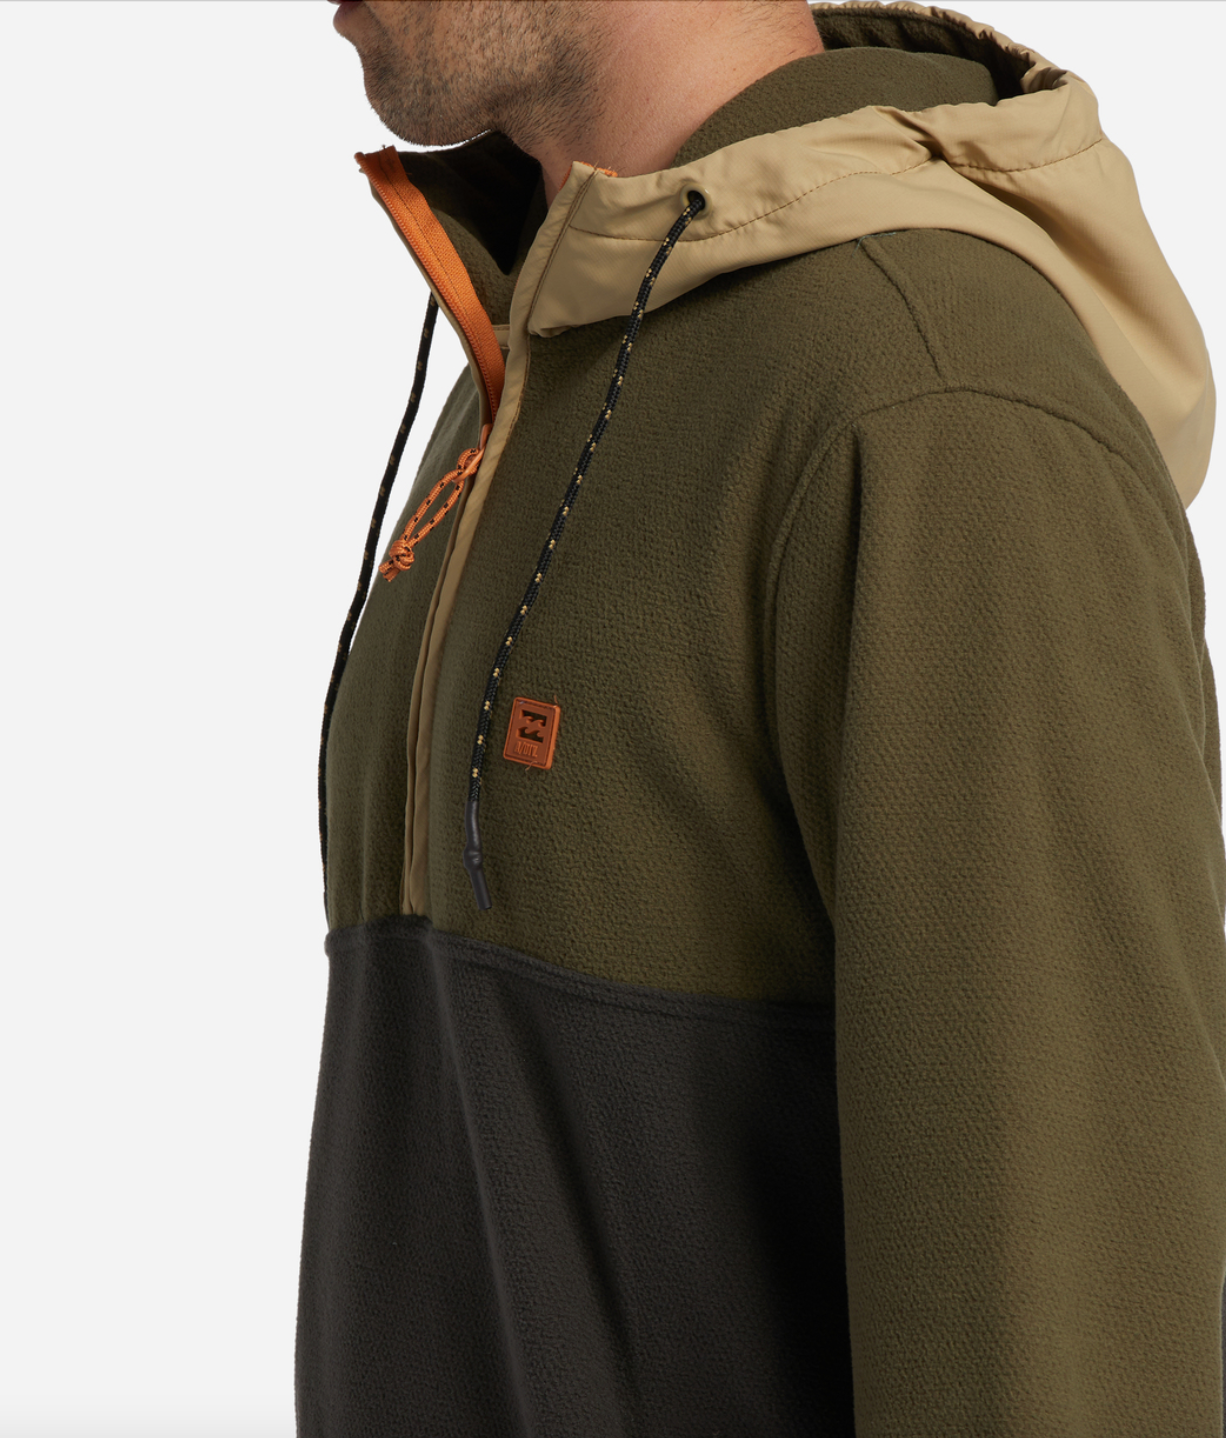 A/Div Boundary Pullover Hooded Half-Zip Pullover - MILITARY